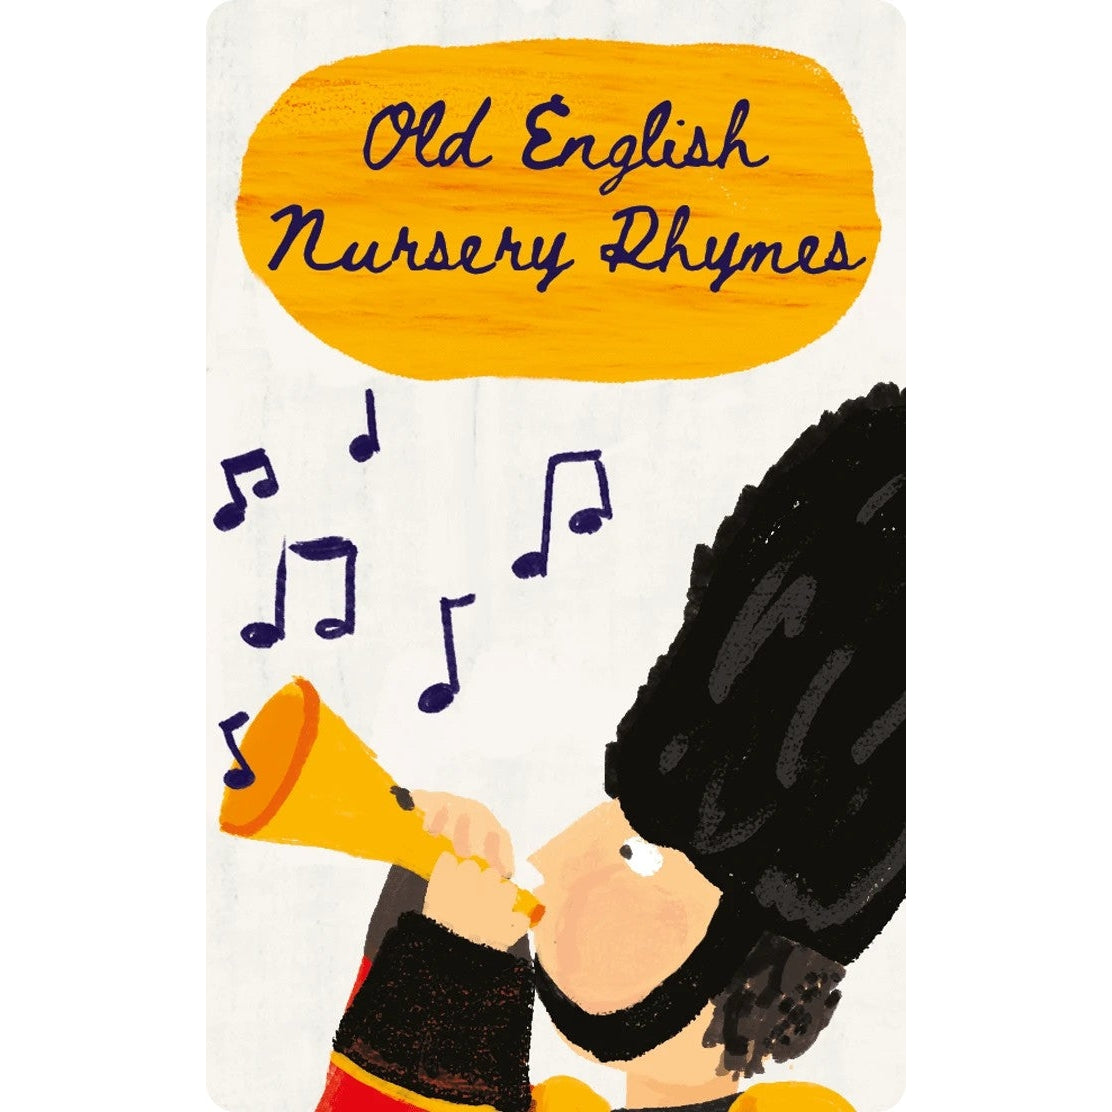 Yoto Card - Old English Nursery Rhymes - Child Friendly Audio Music Card for the Yoto Player